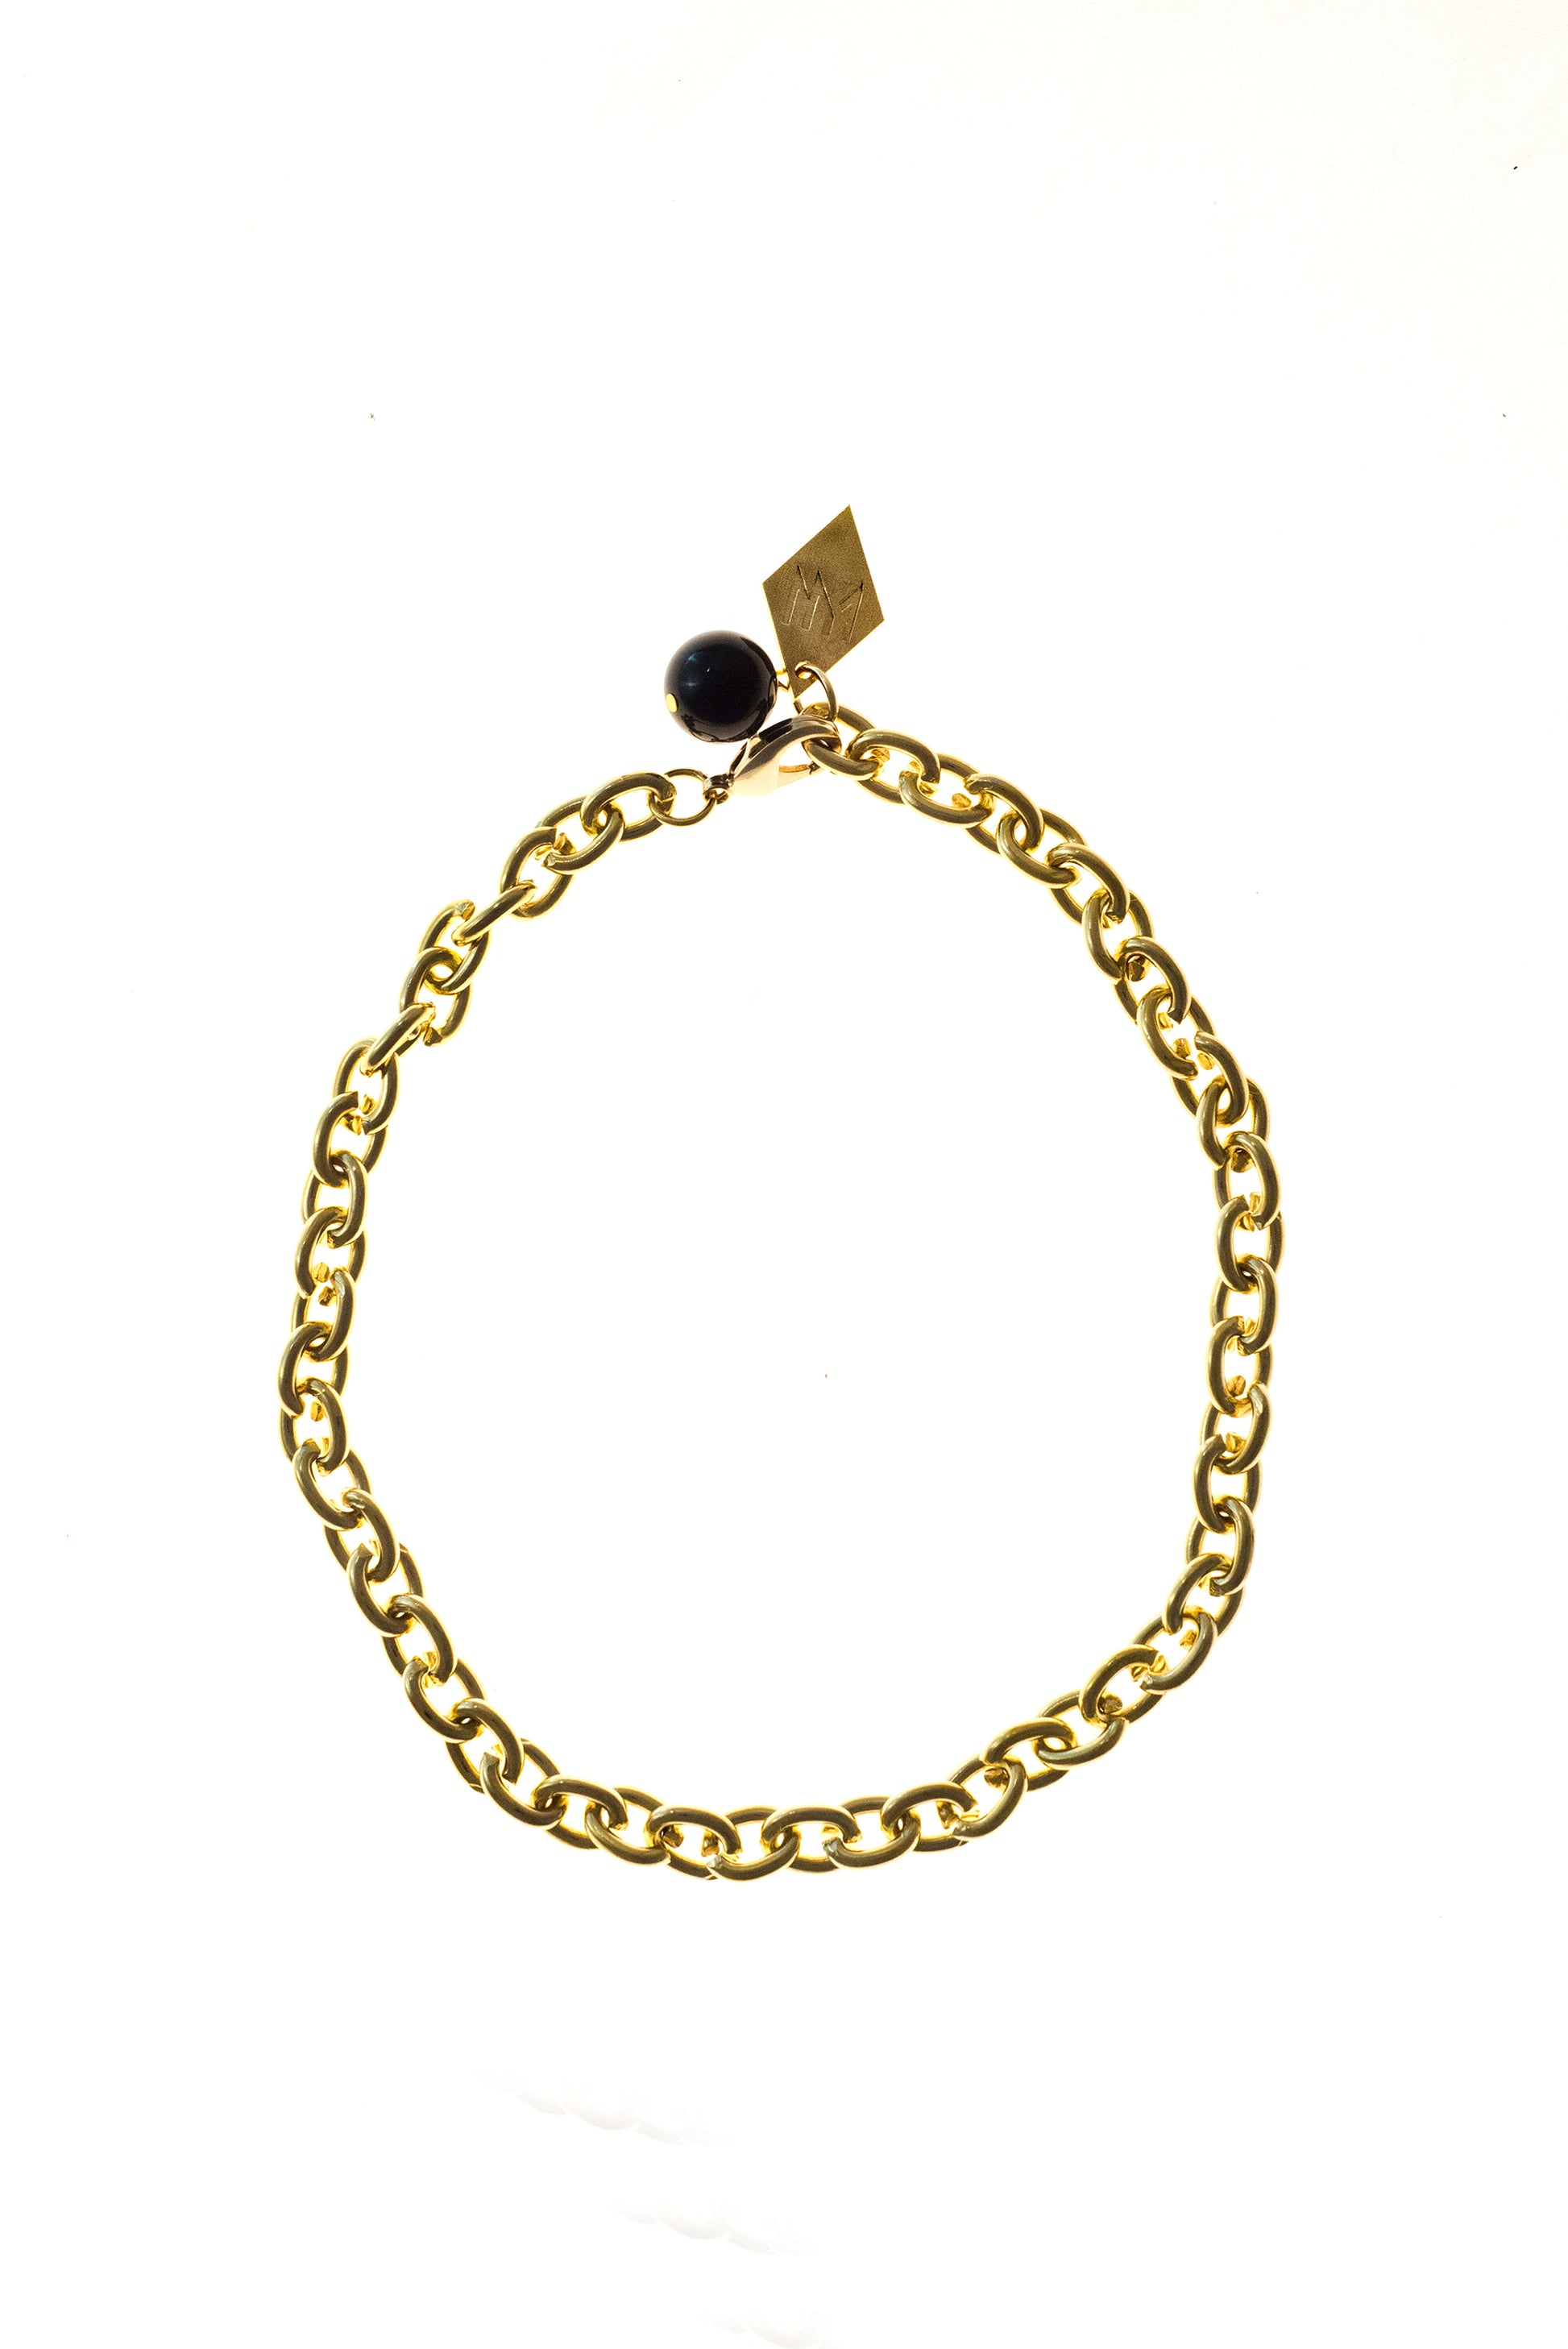 Anchor necklace is made of 24K gold-plated brass.